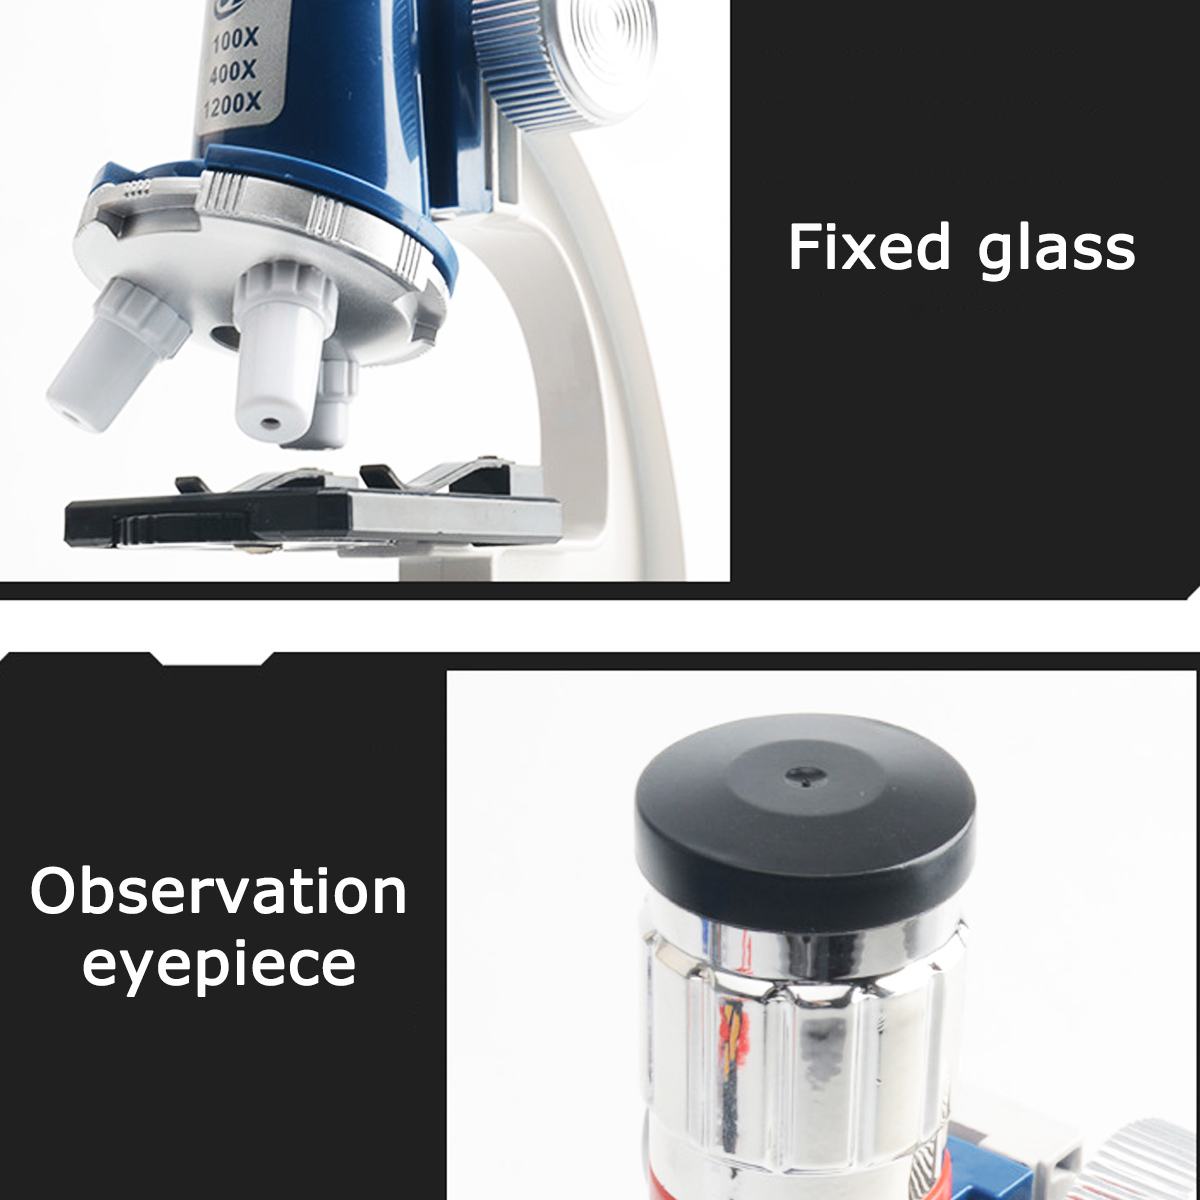 1200X-400X-100X-Magnification-Kids-Microscope-Children-Science-Educational-Toy-1887283-5